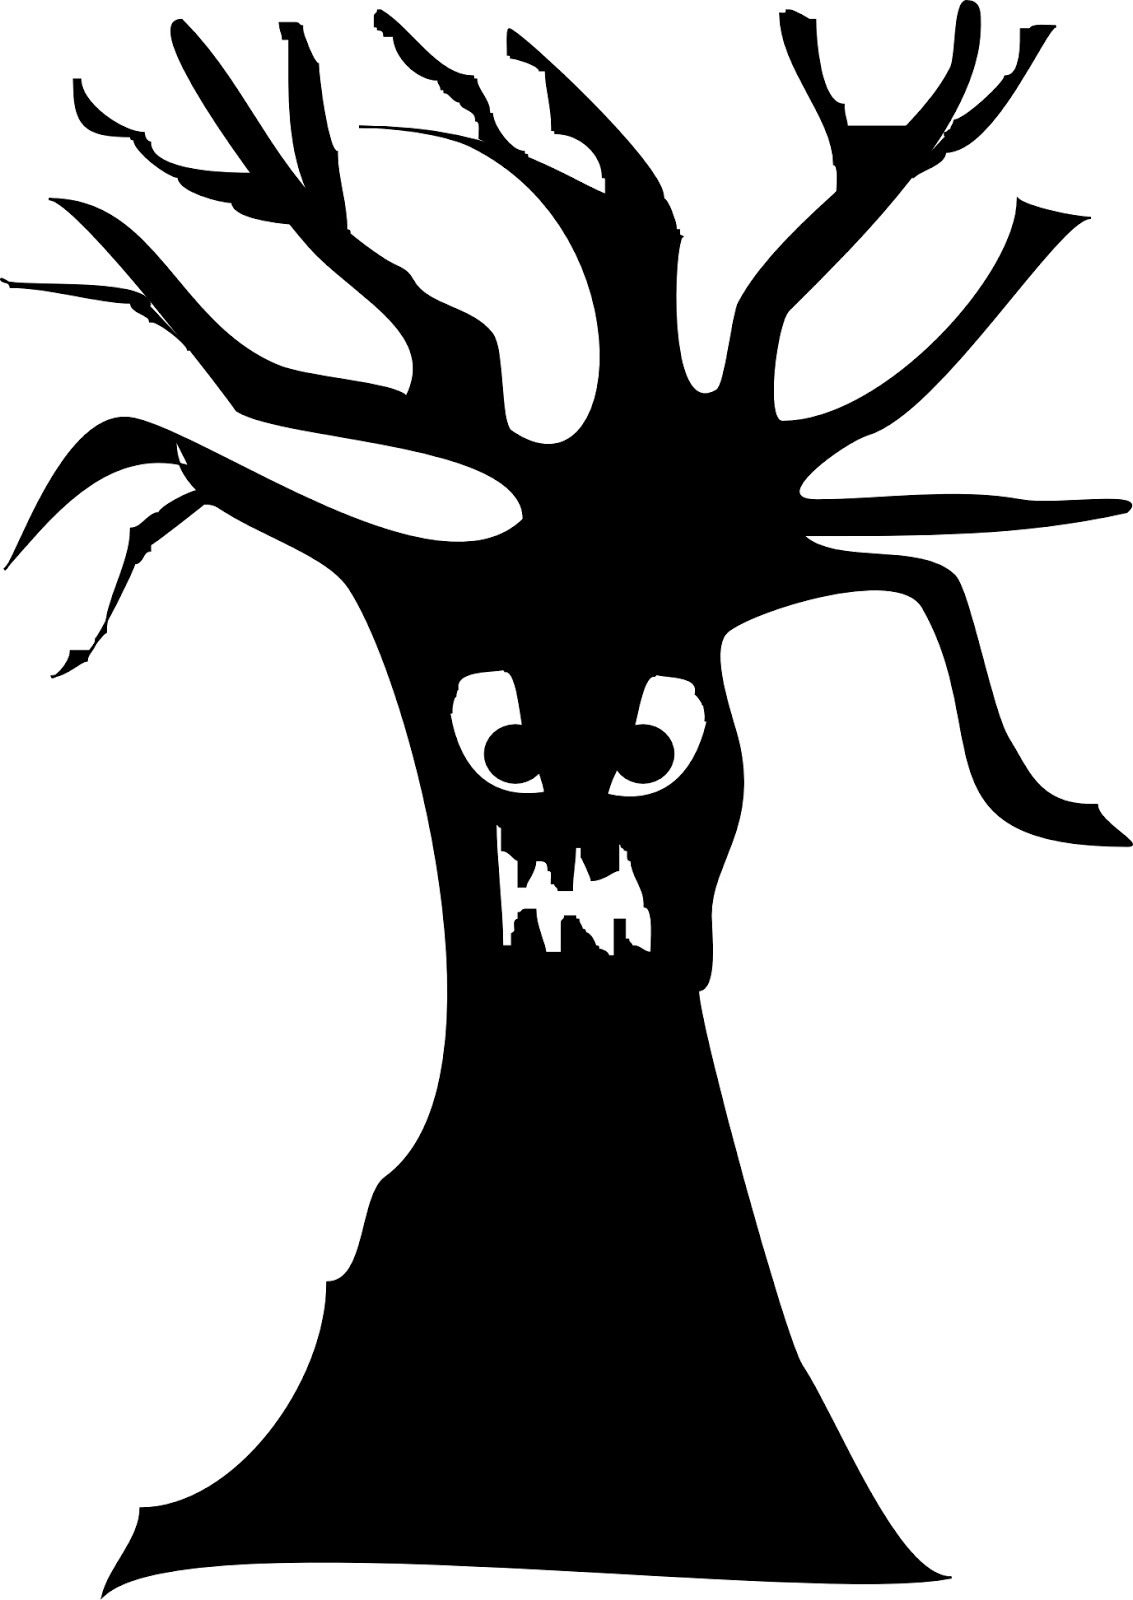 Scary Tree Silhouette - ClipArt Best